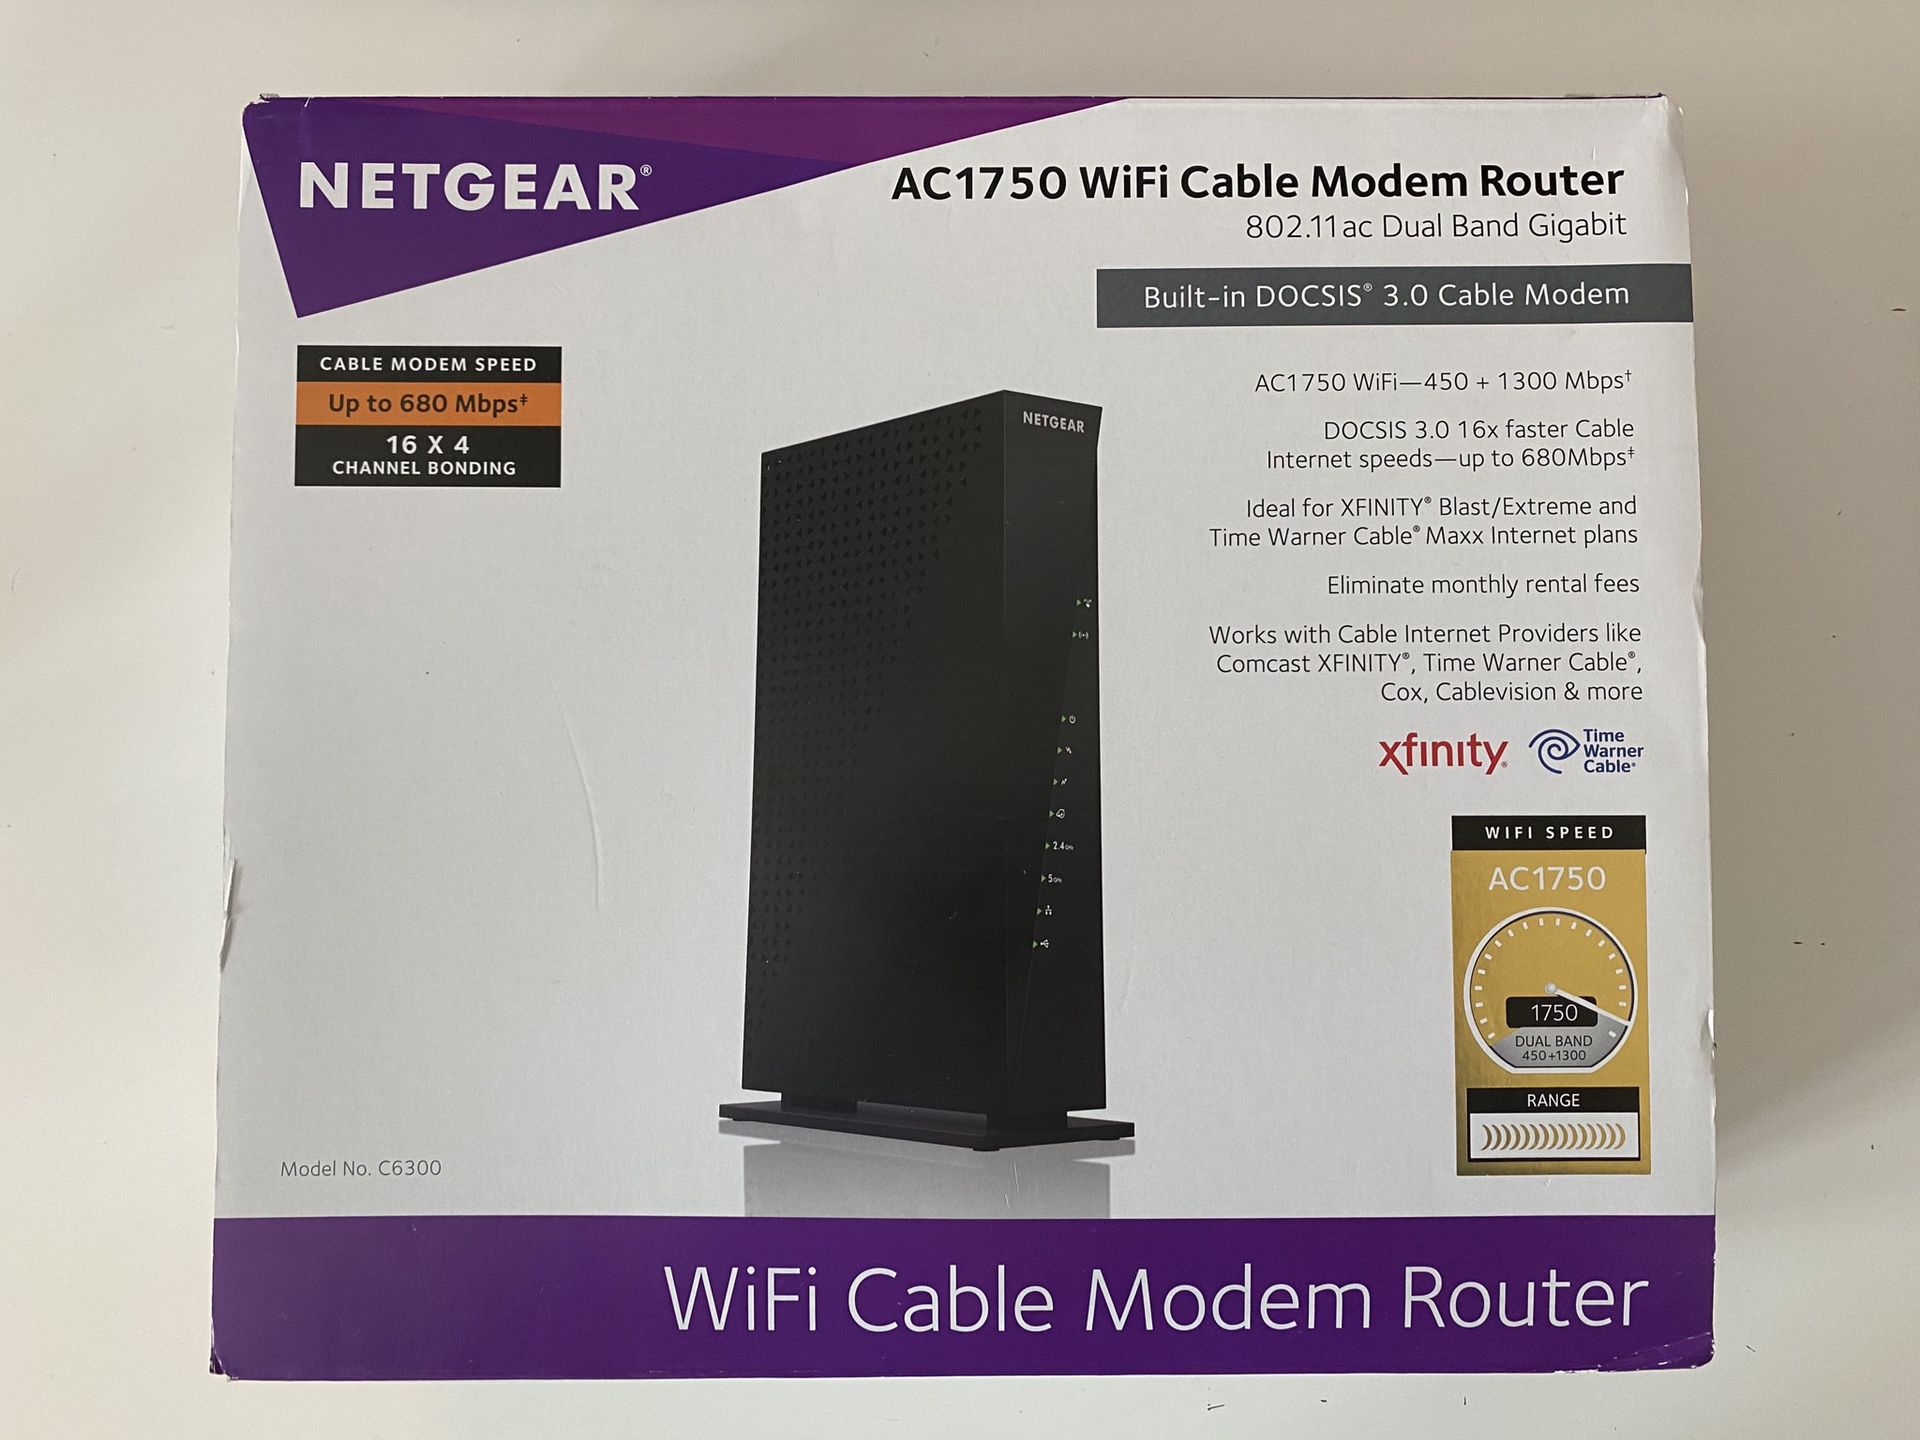 LIKE NEW - Netgear AC1750 WiFi Cable Modem Router